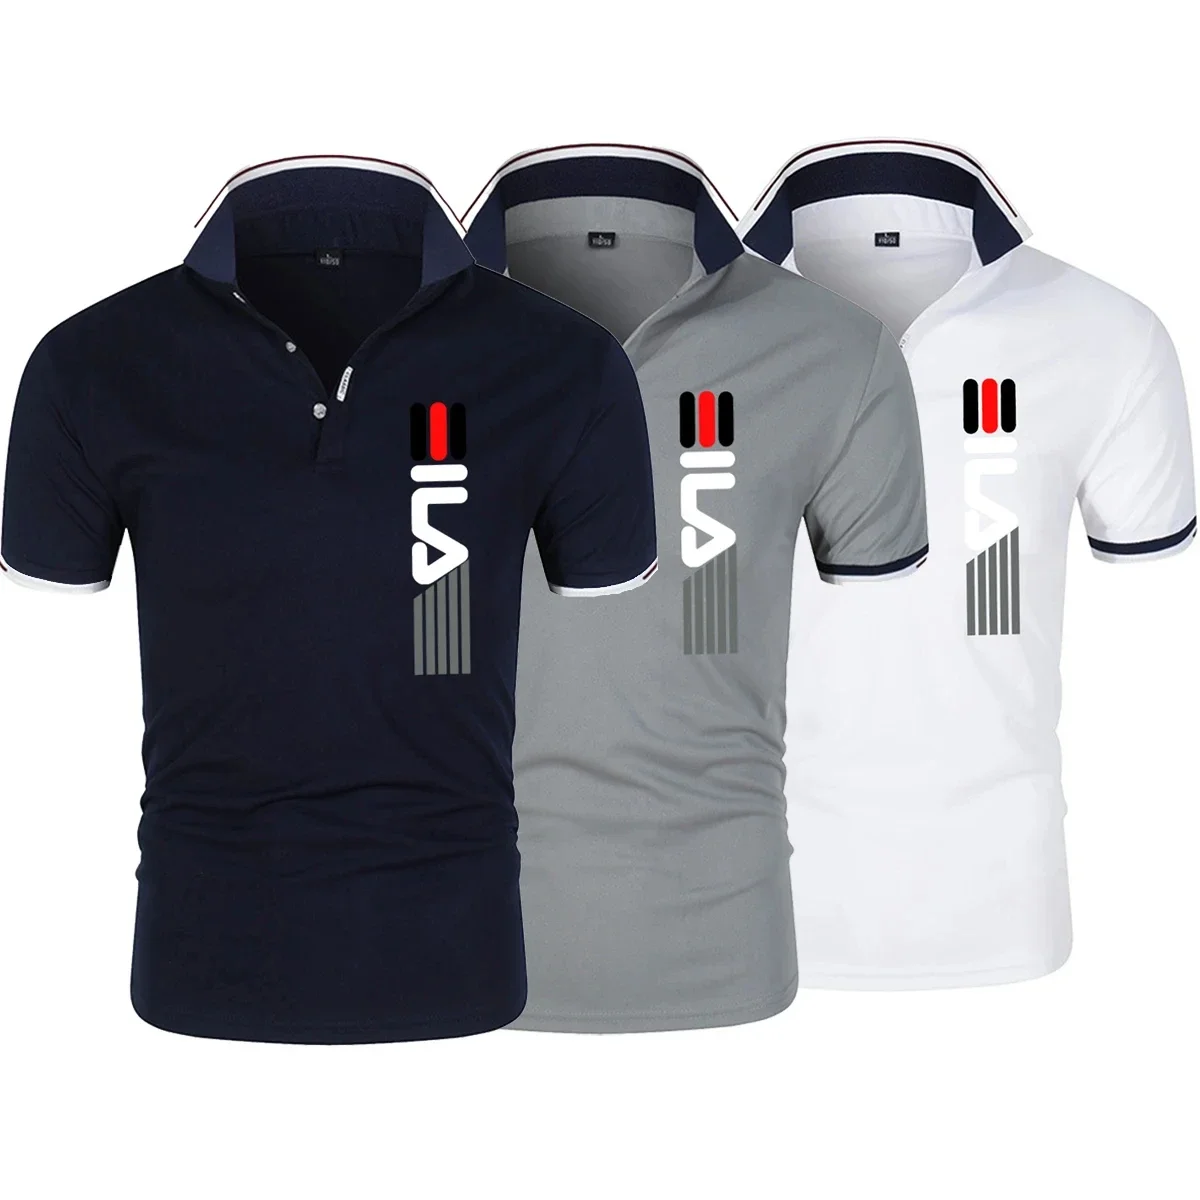 

Summer new selling men's lapel anti-pilling Polo shirt printed short sleeve casual business fashion slim breathable men's T-shir